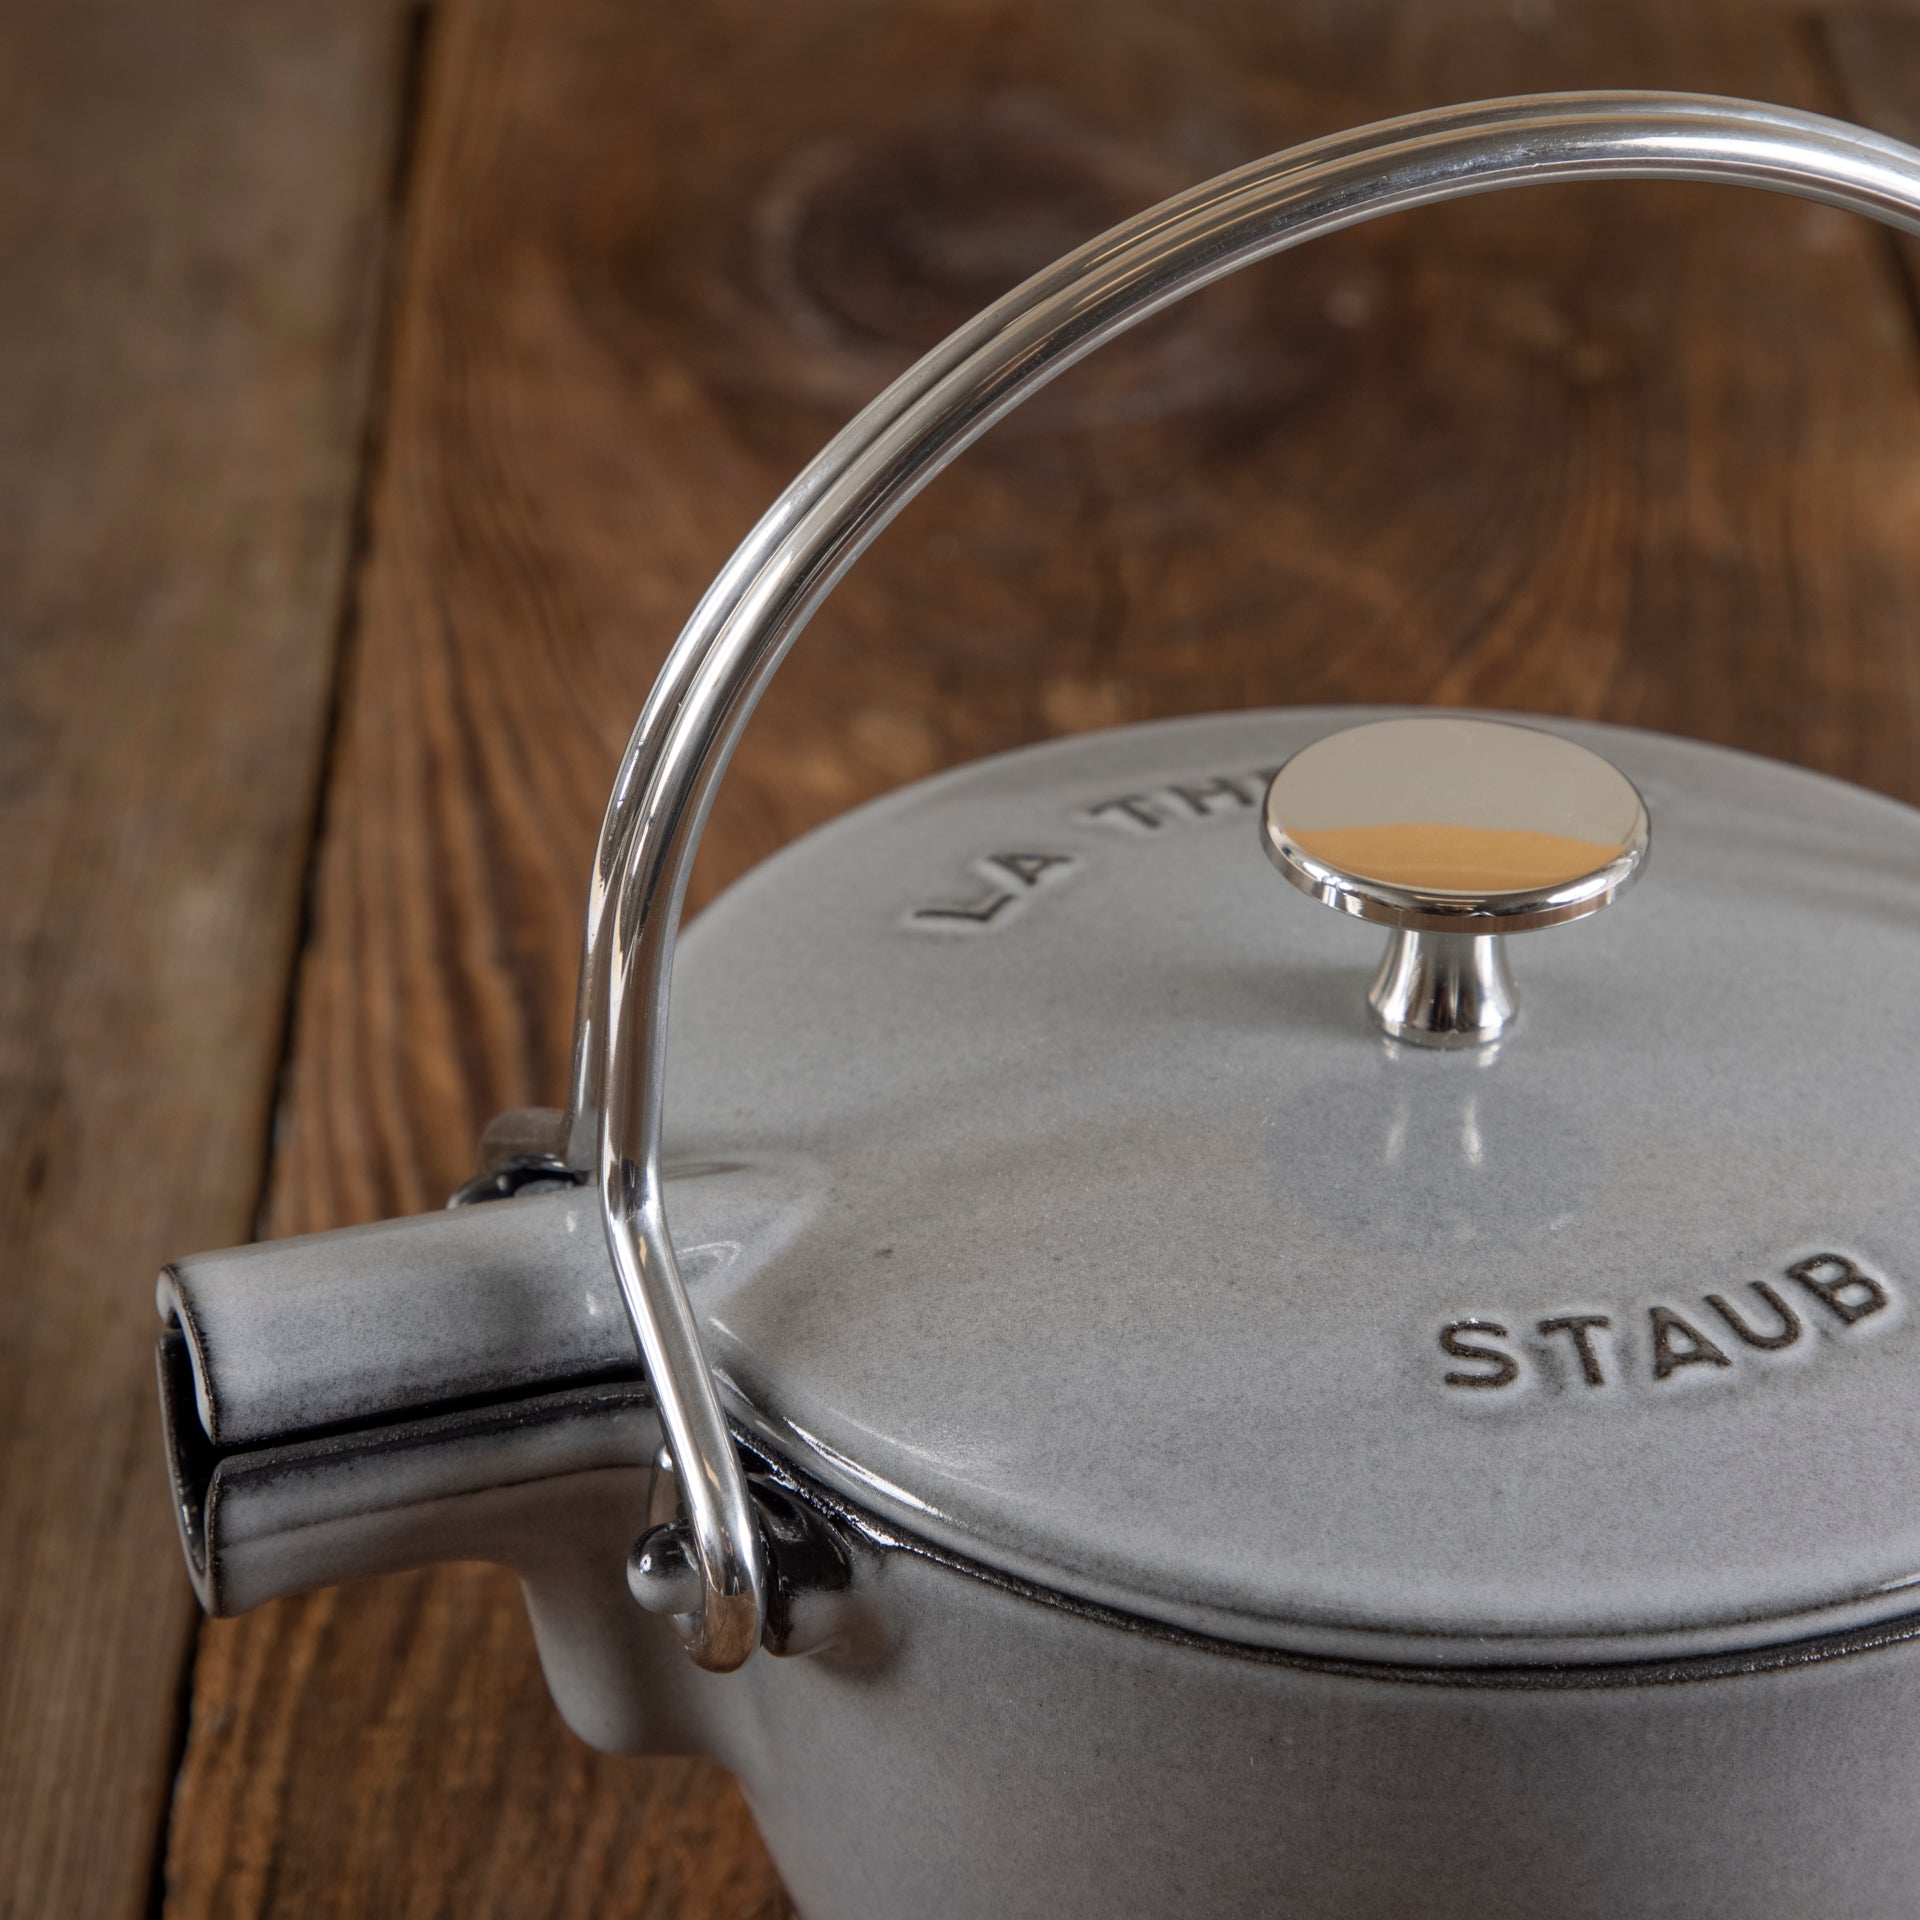 Staub Cast Iron Round Tea Kettle, 1QT, Enameled Cast Iron, Made in